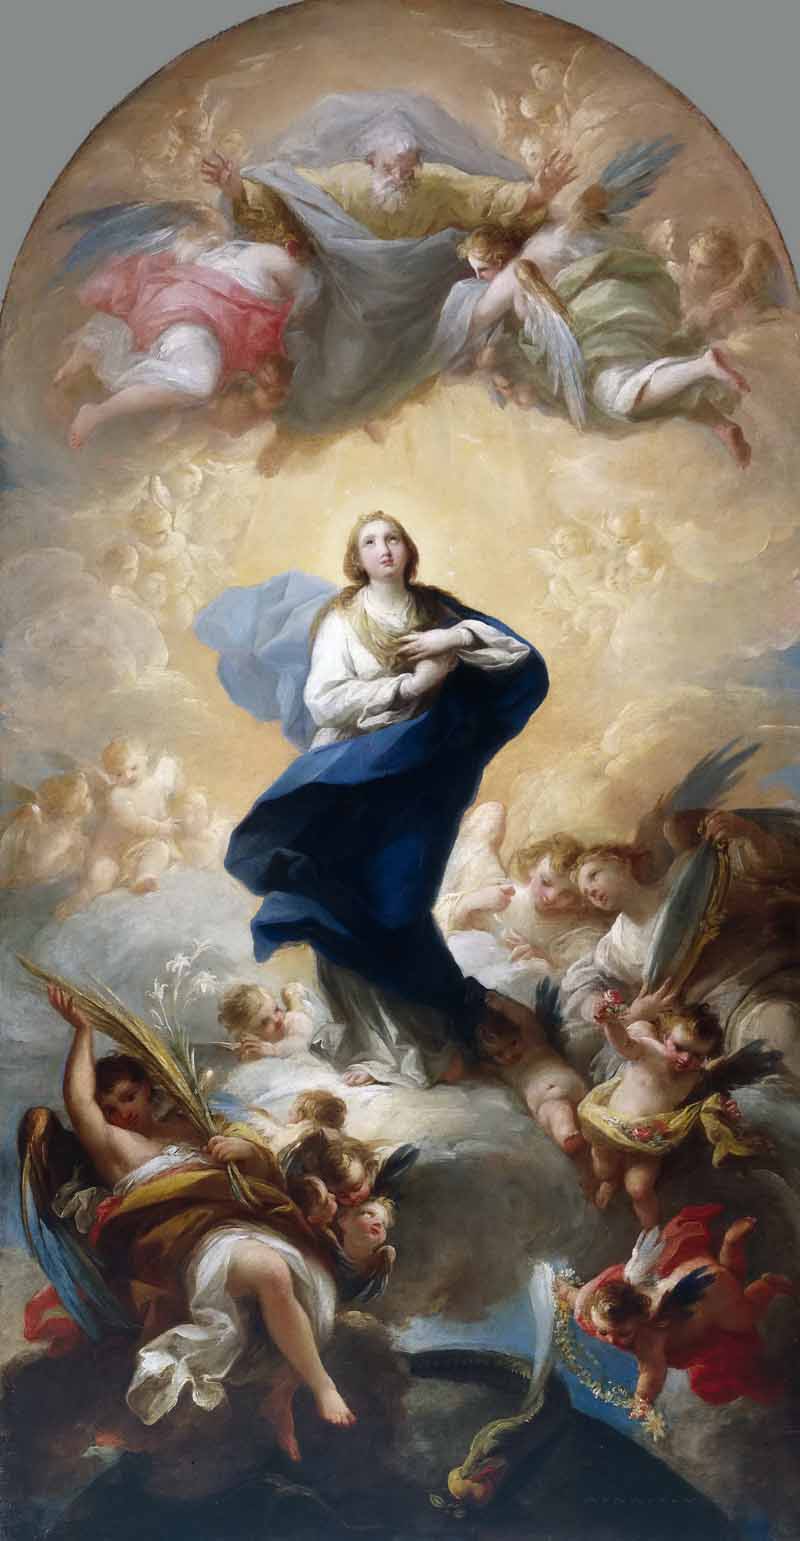 The Immaculate Conception. Mariano Salvador Maella